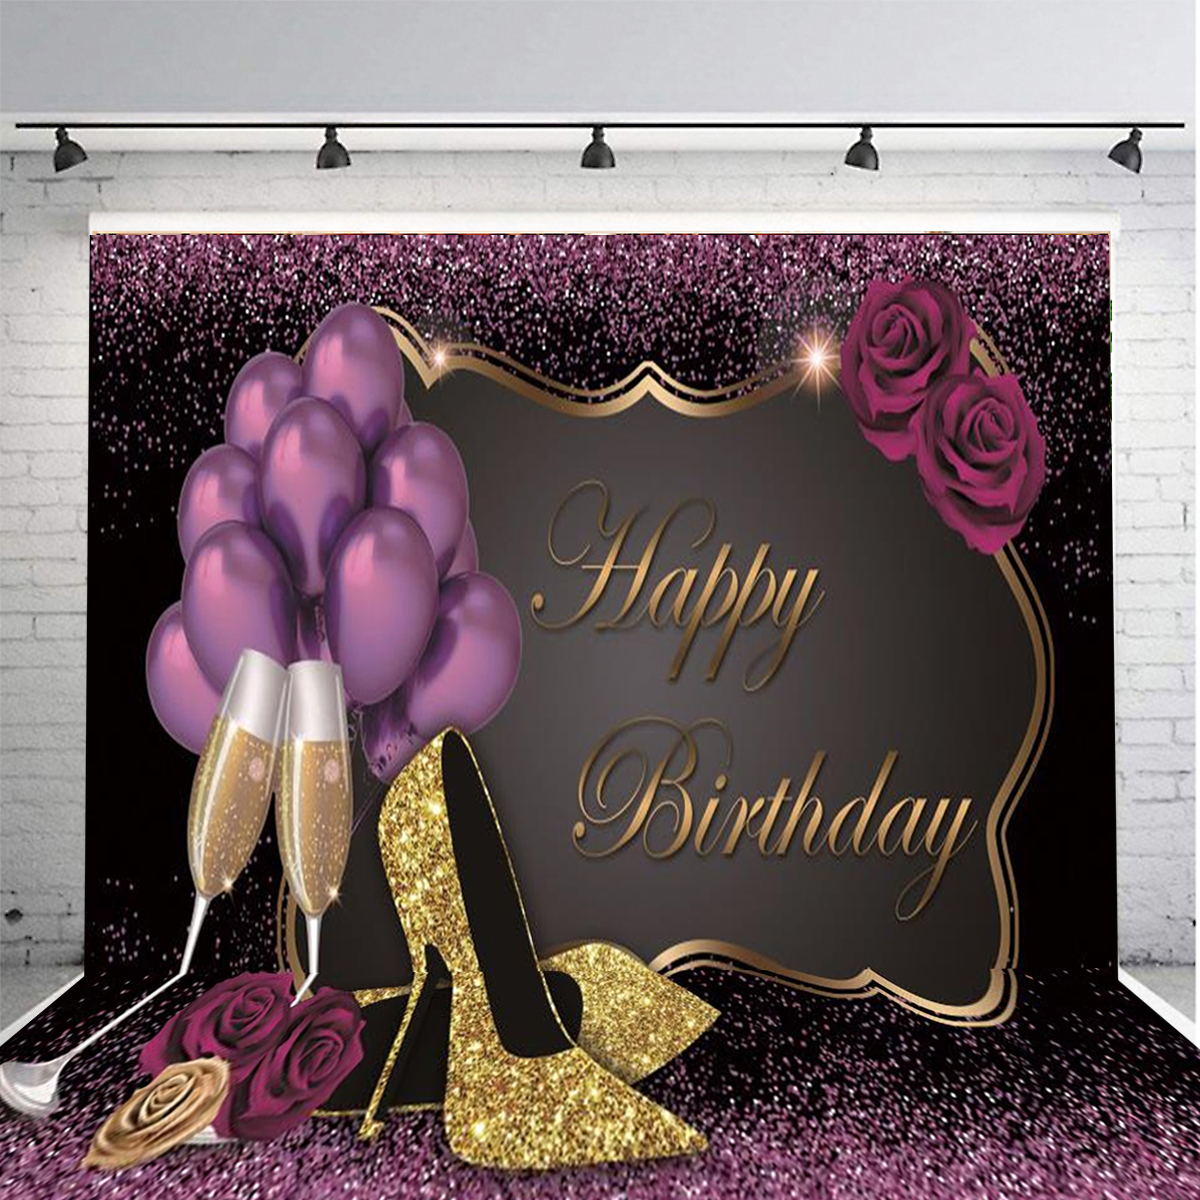 Happy-Birthday-Party-Photo-Photography-Backdrop-Cloth-Studio-Background-Home-Decoration-Props-1821314-10